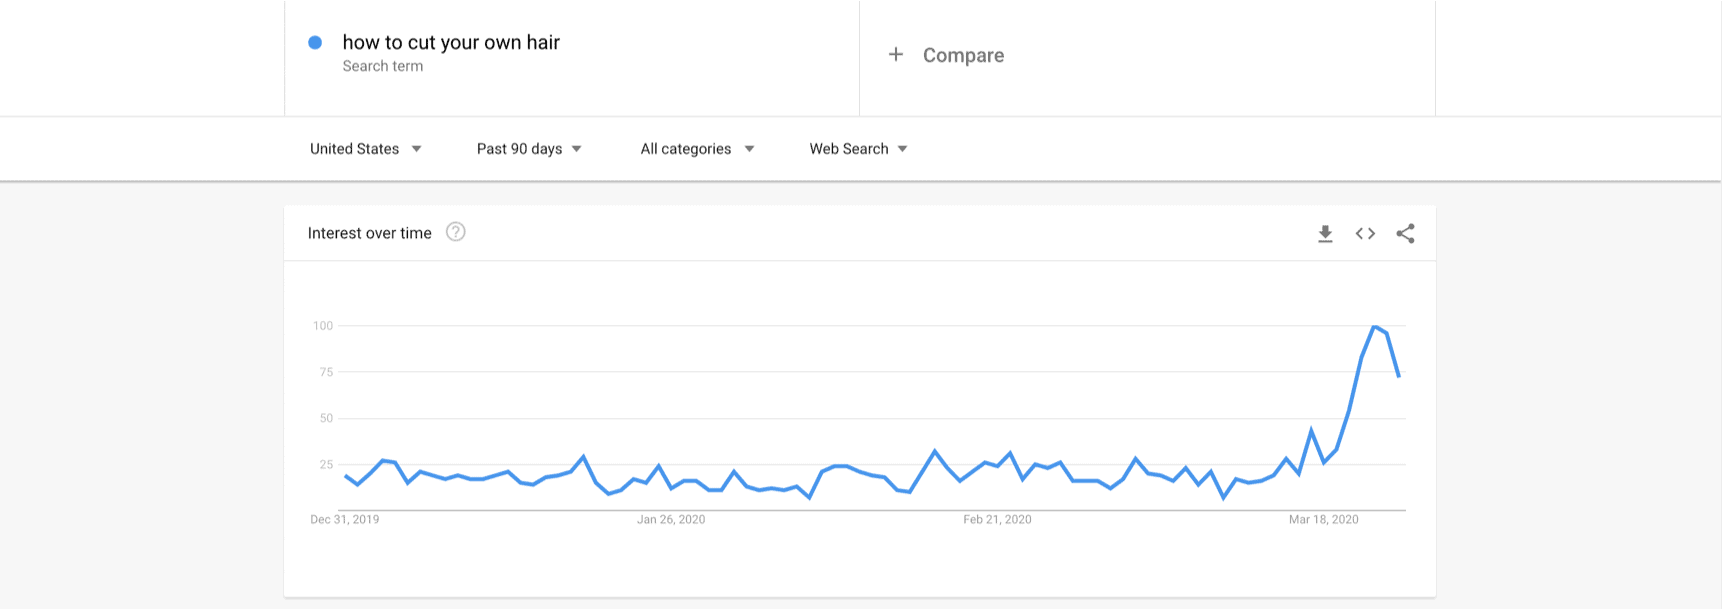 google trends shows how to cut your own hair is trending